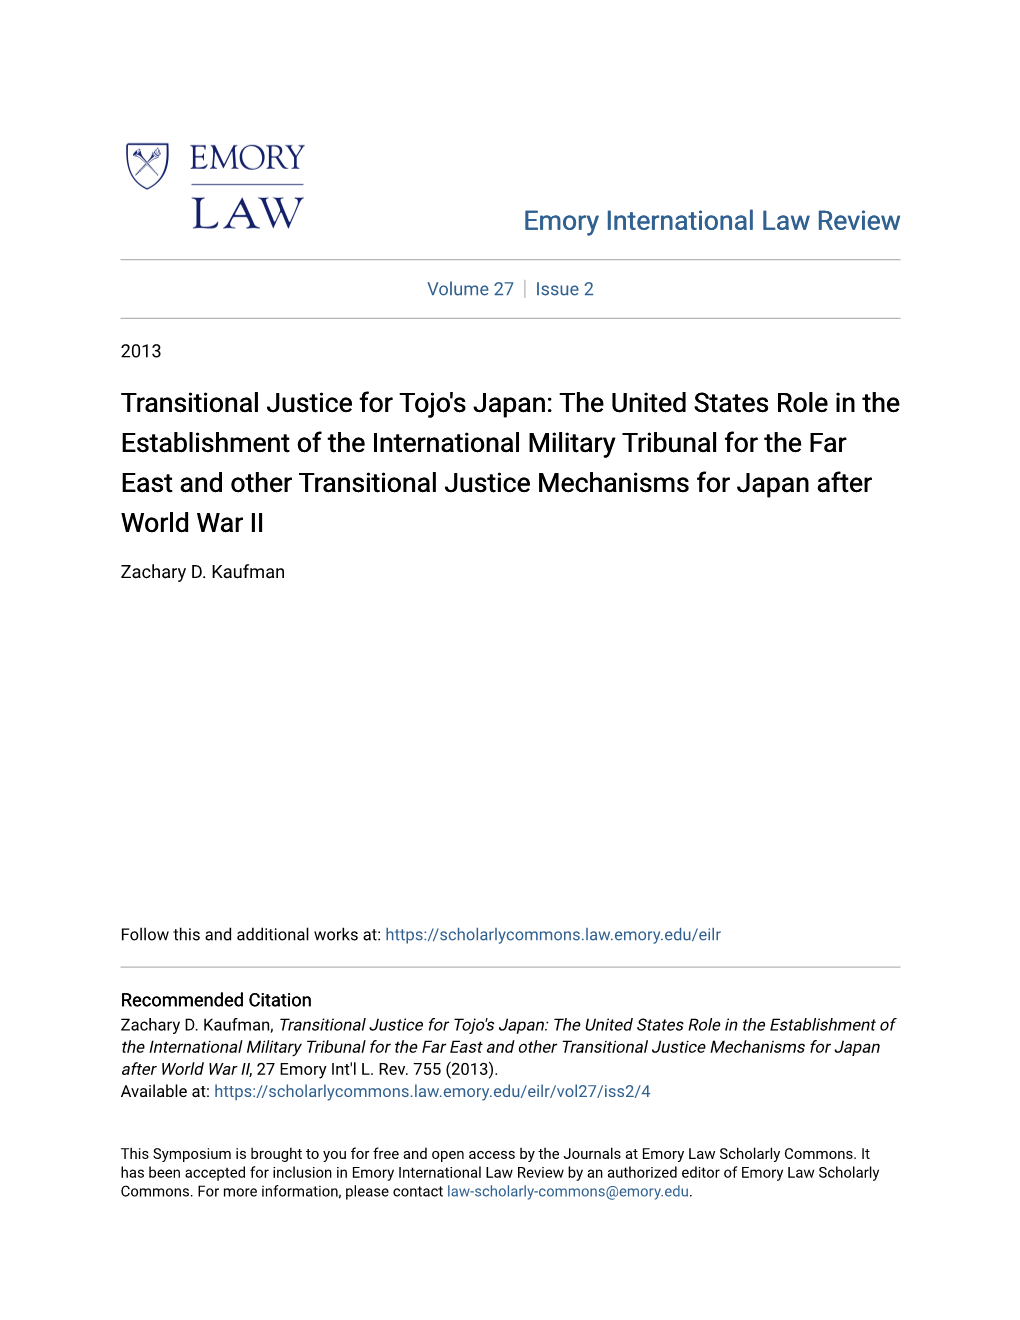 Transitional Justice for Tojo's Japan